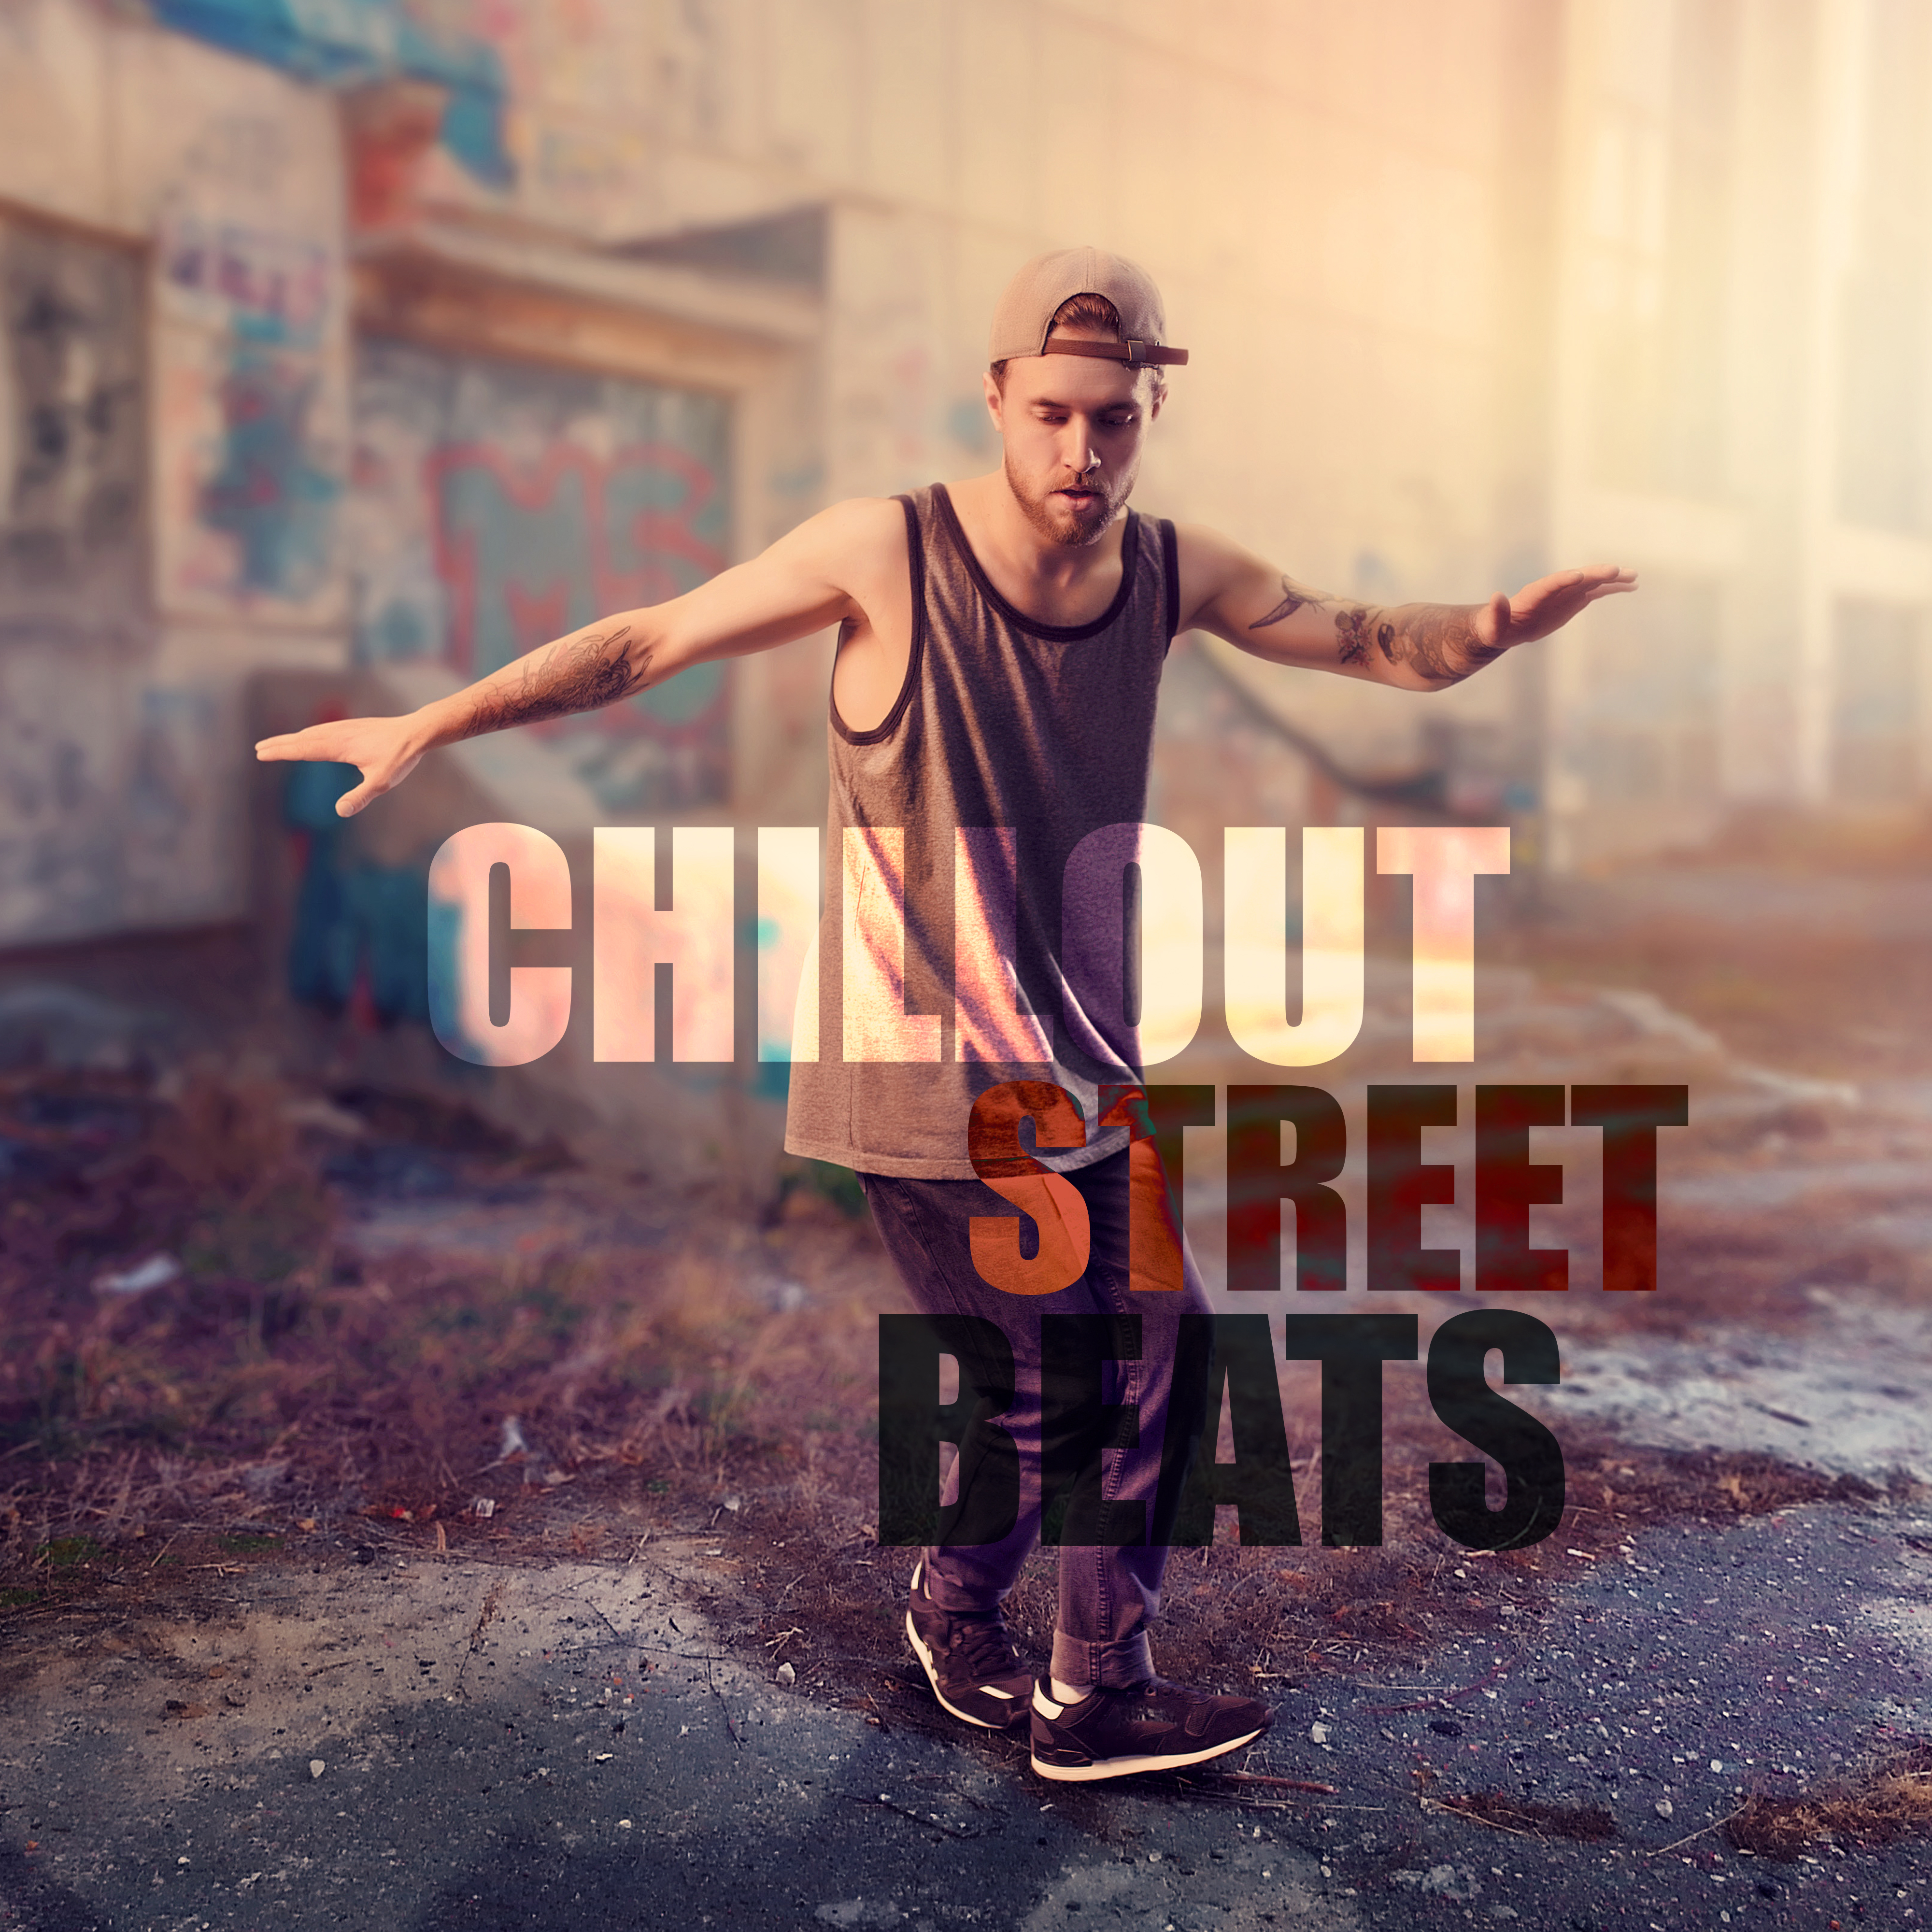 Chillout Street Beats - #2018 Chill Out